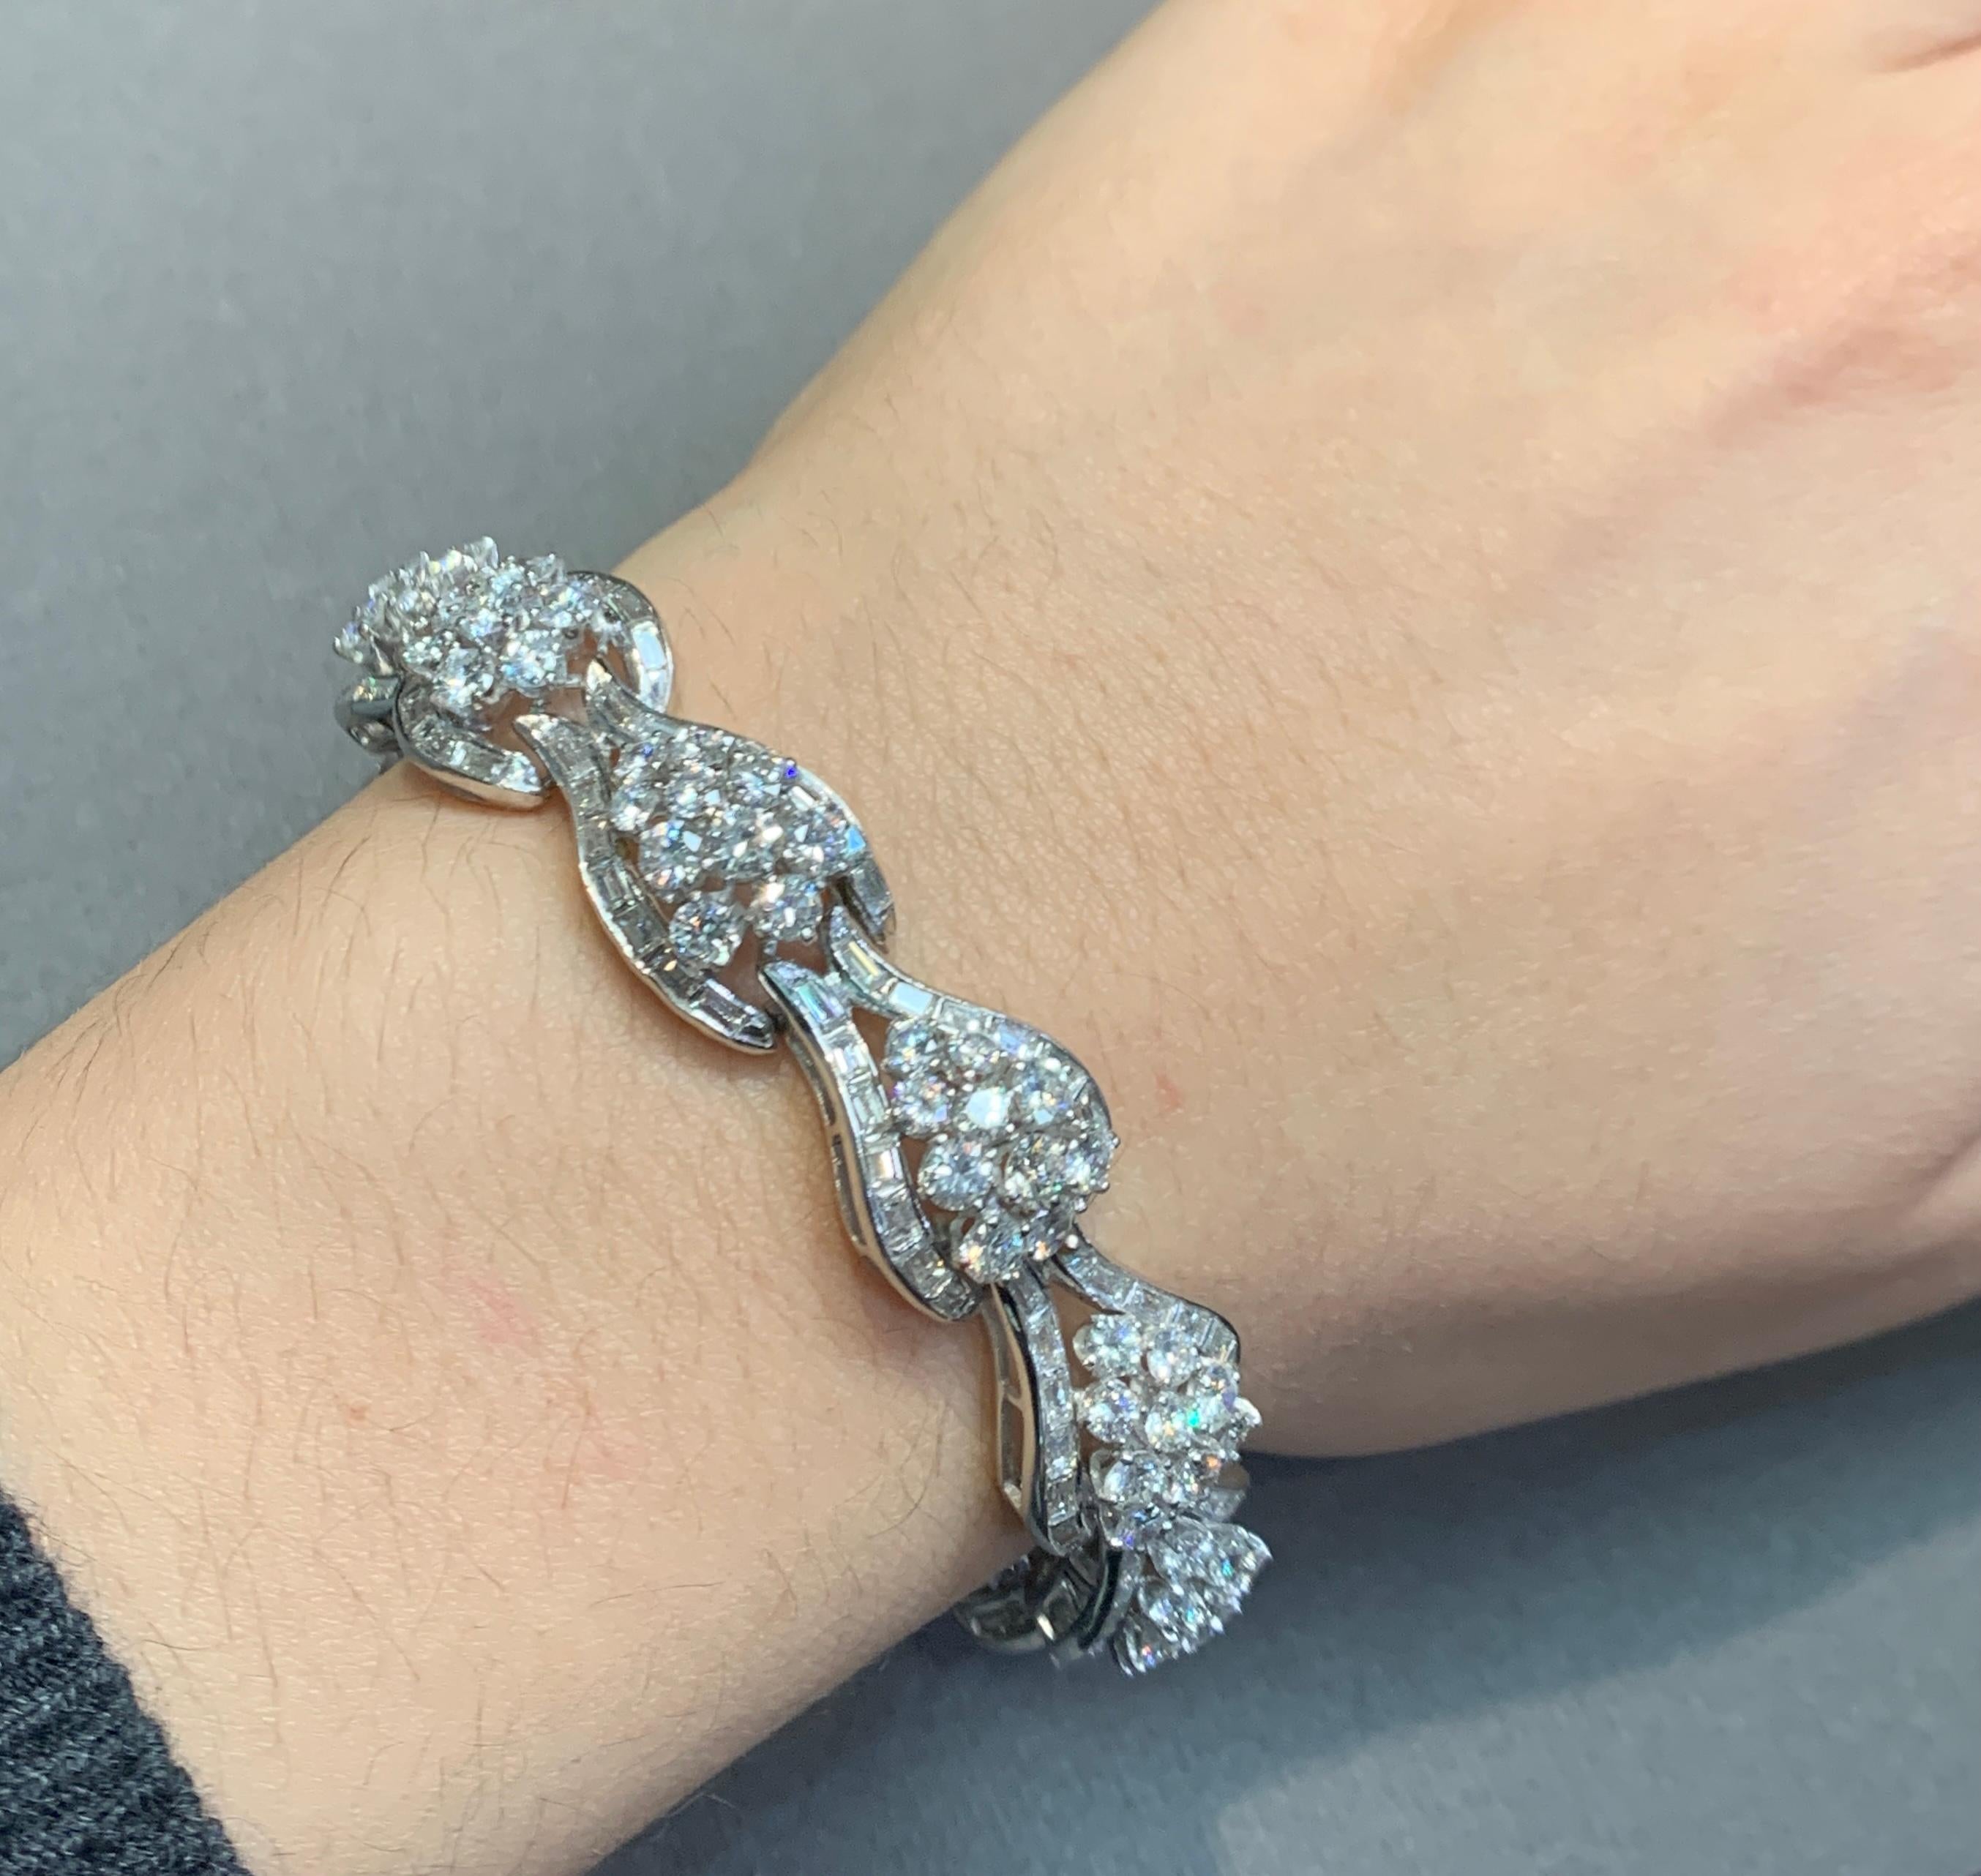 Vintage Diamond Cluster Bracelet

A bracelet consisting of 12 links with round and baguette cut diamonds set in platinum. 

Diamond Weight: approximately 21.4 carats 
Metal Type: Platinum 
Approximately measurements: 7.5